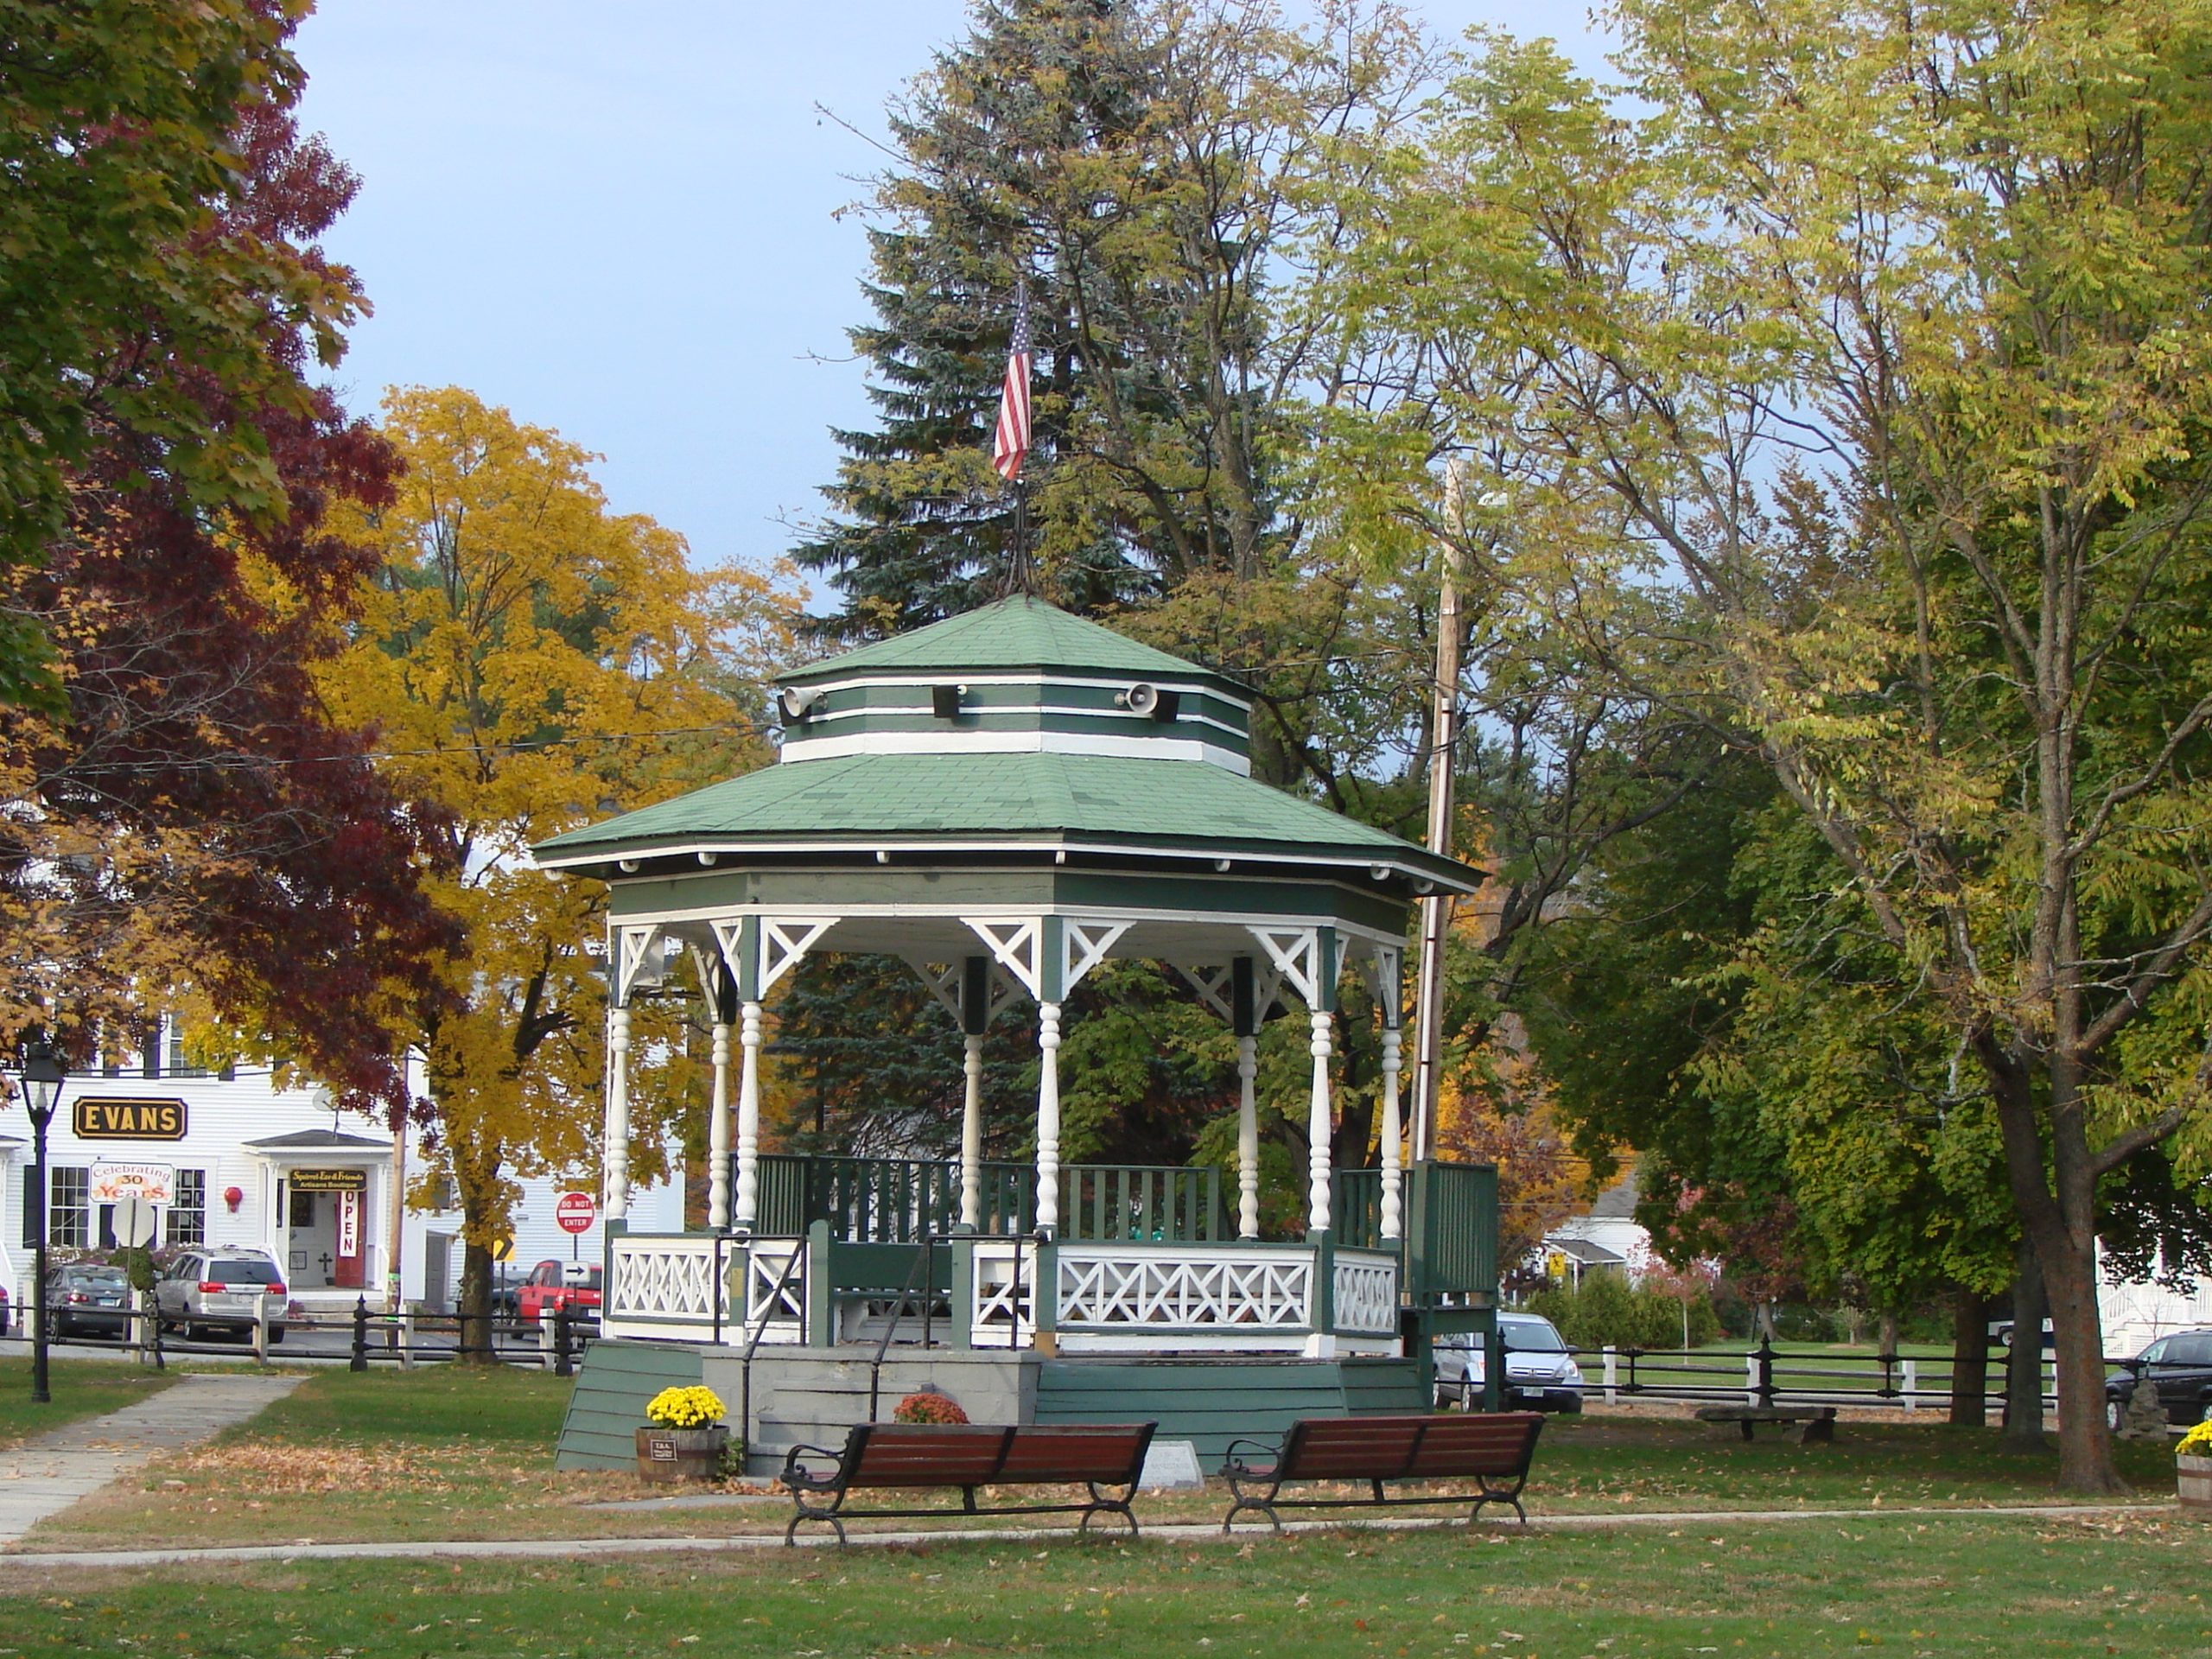 Townsend Gazebo (user submitted)